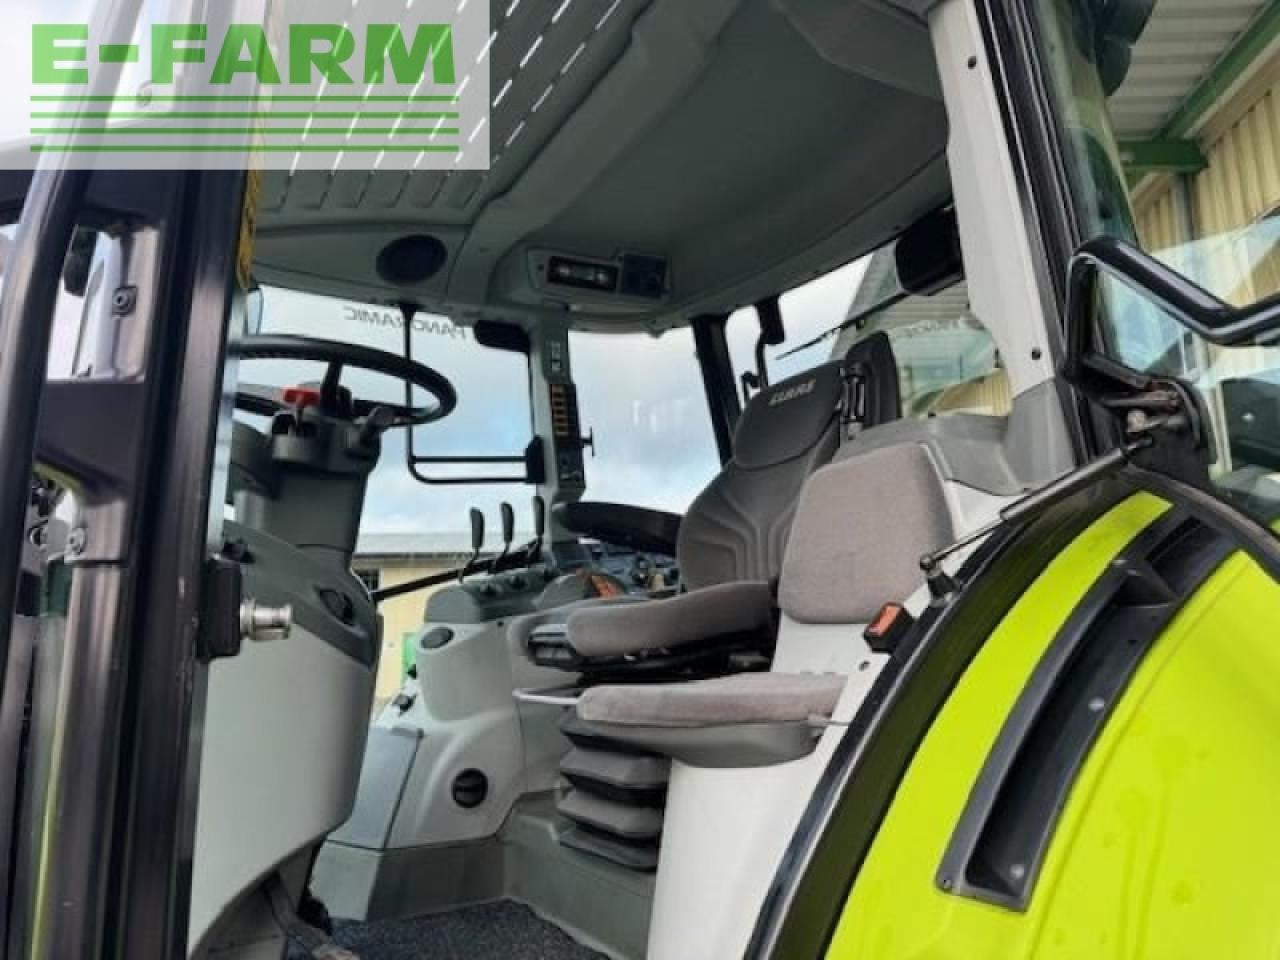 Tracteur agricole CLAAS arion 410 panoramic